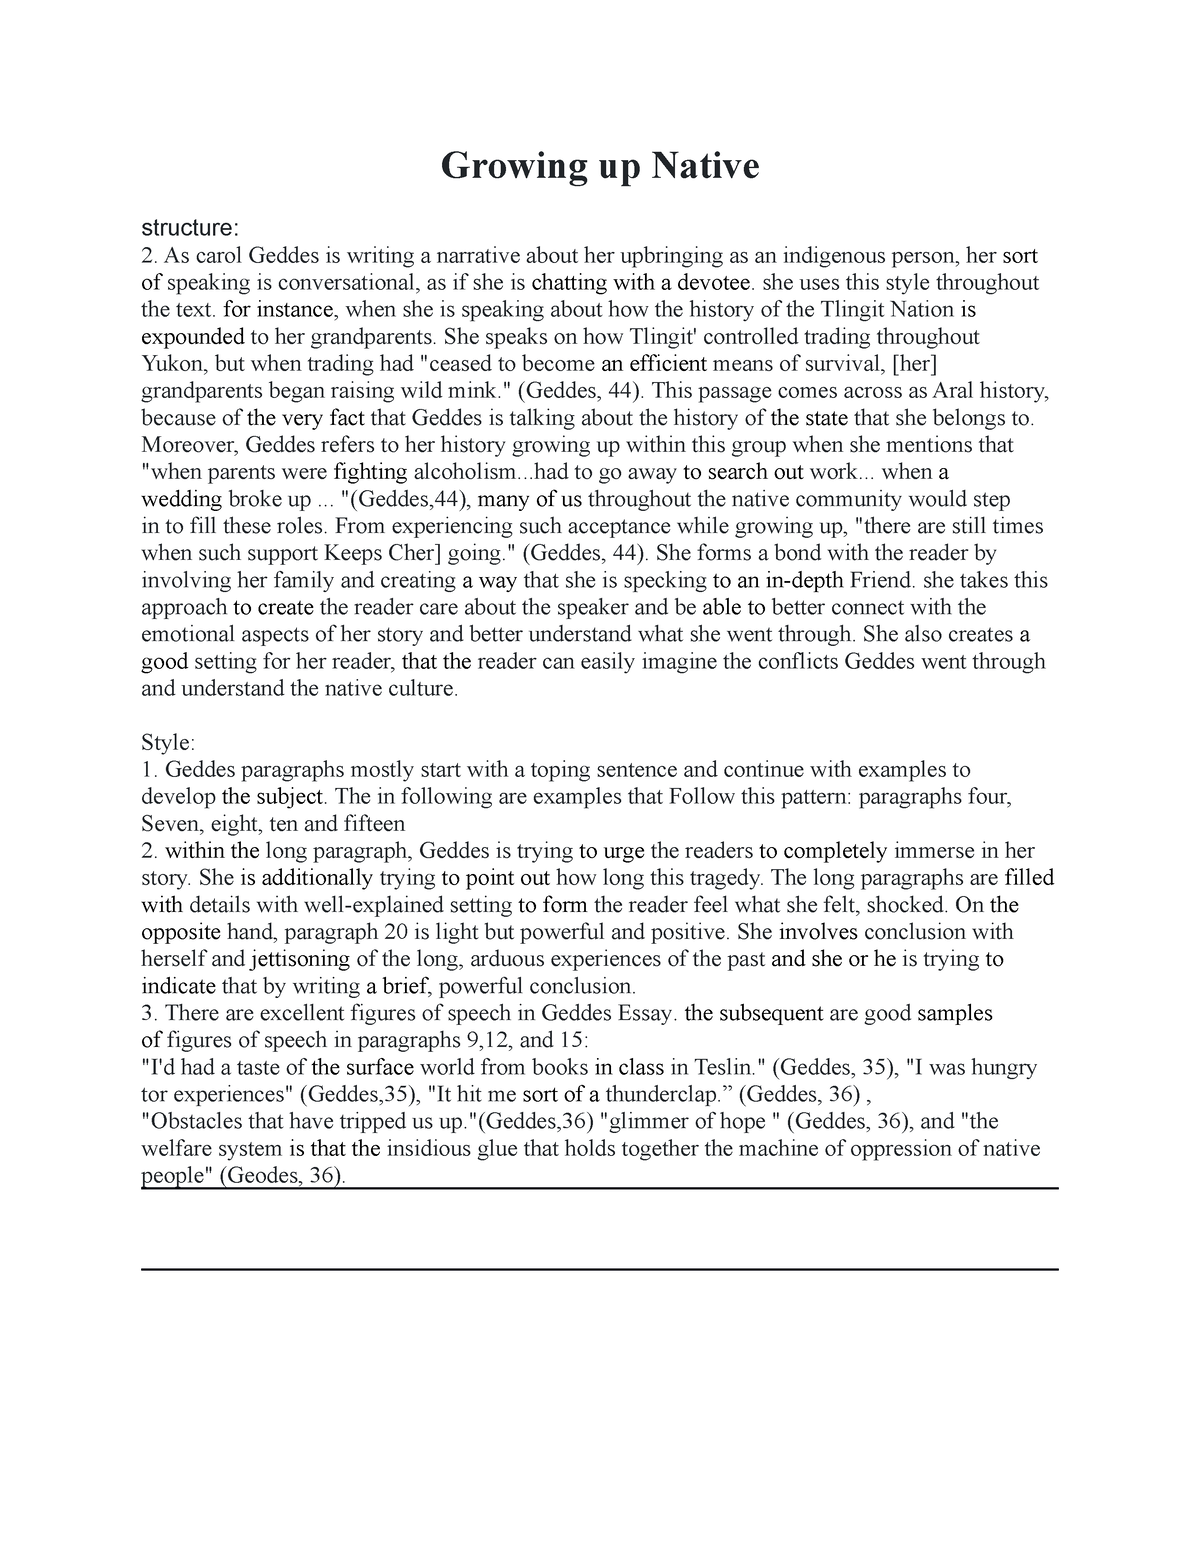 growing up native essay thesis